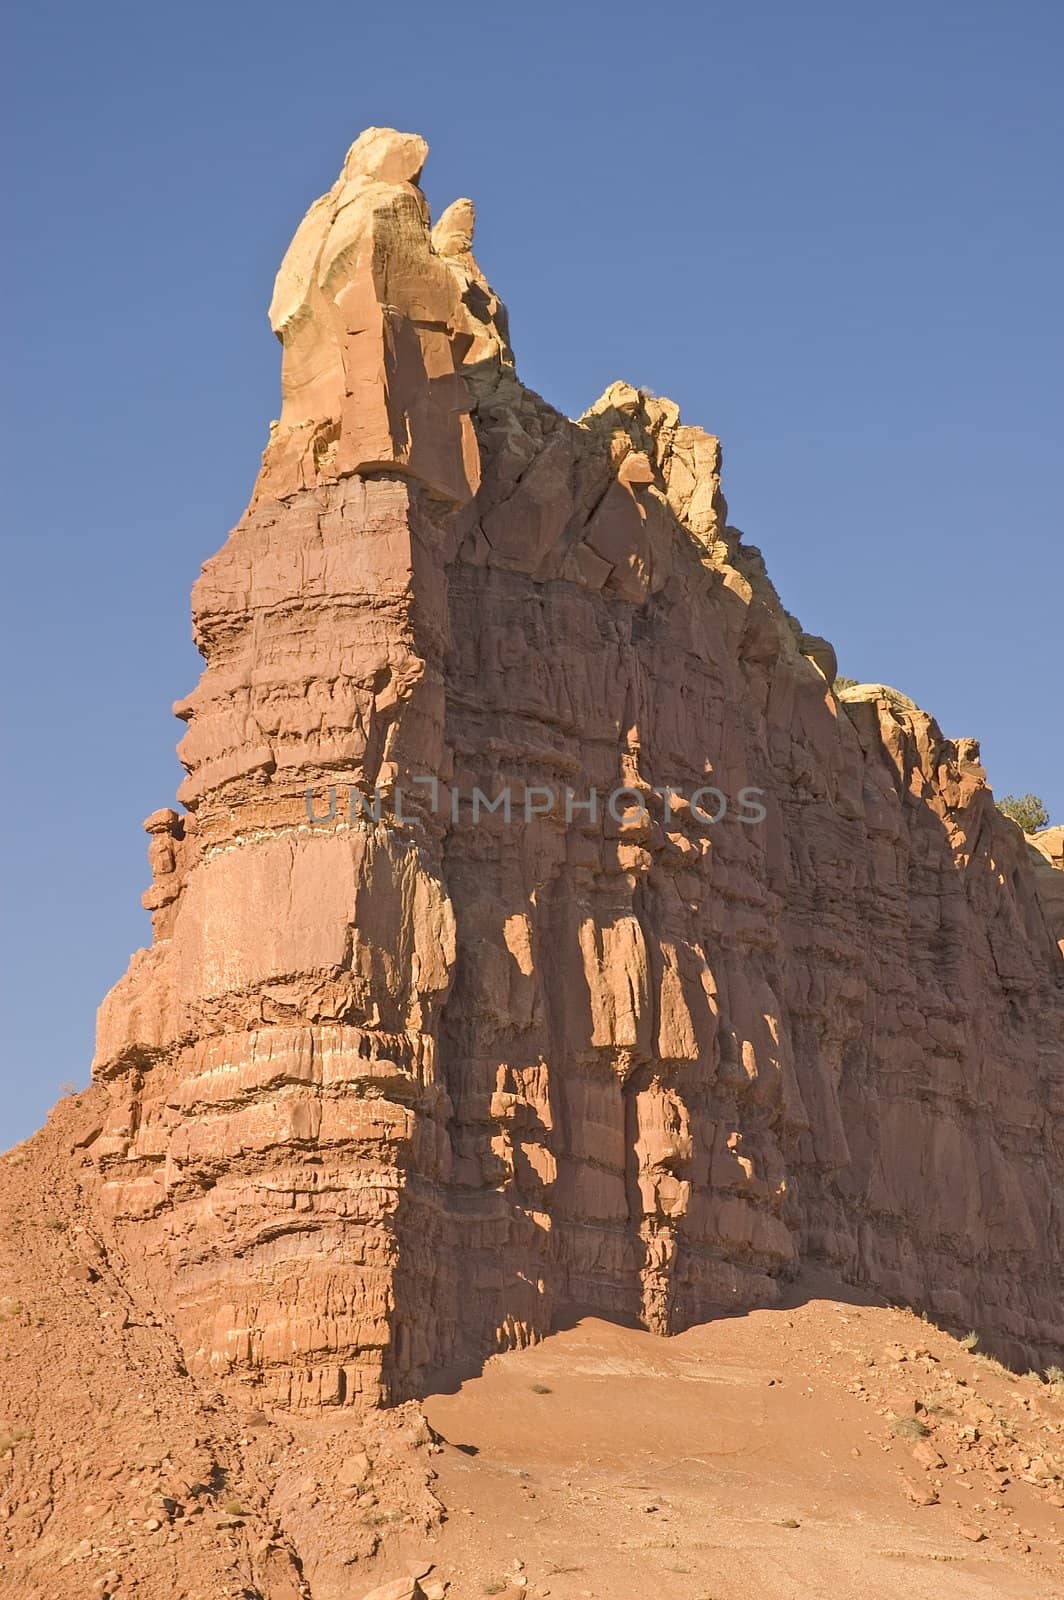 Red Rock outcrop looking like a fortress tower in the New Mexico Desert